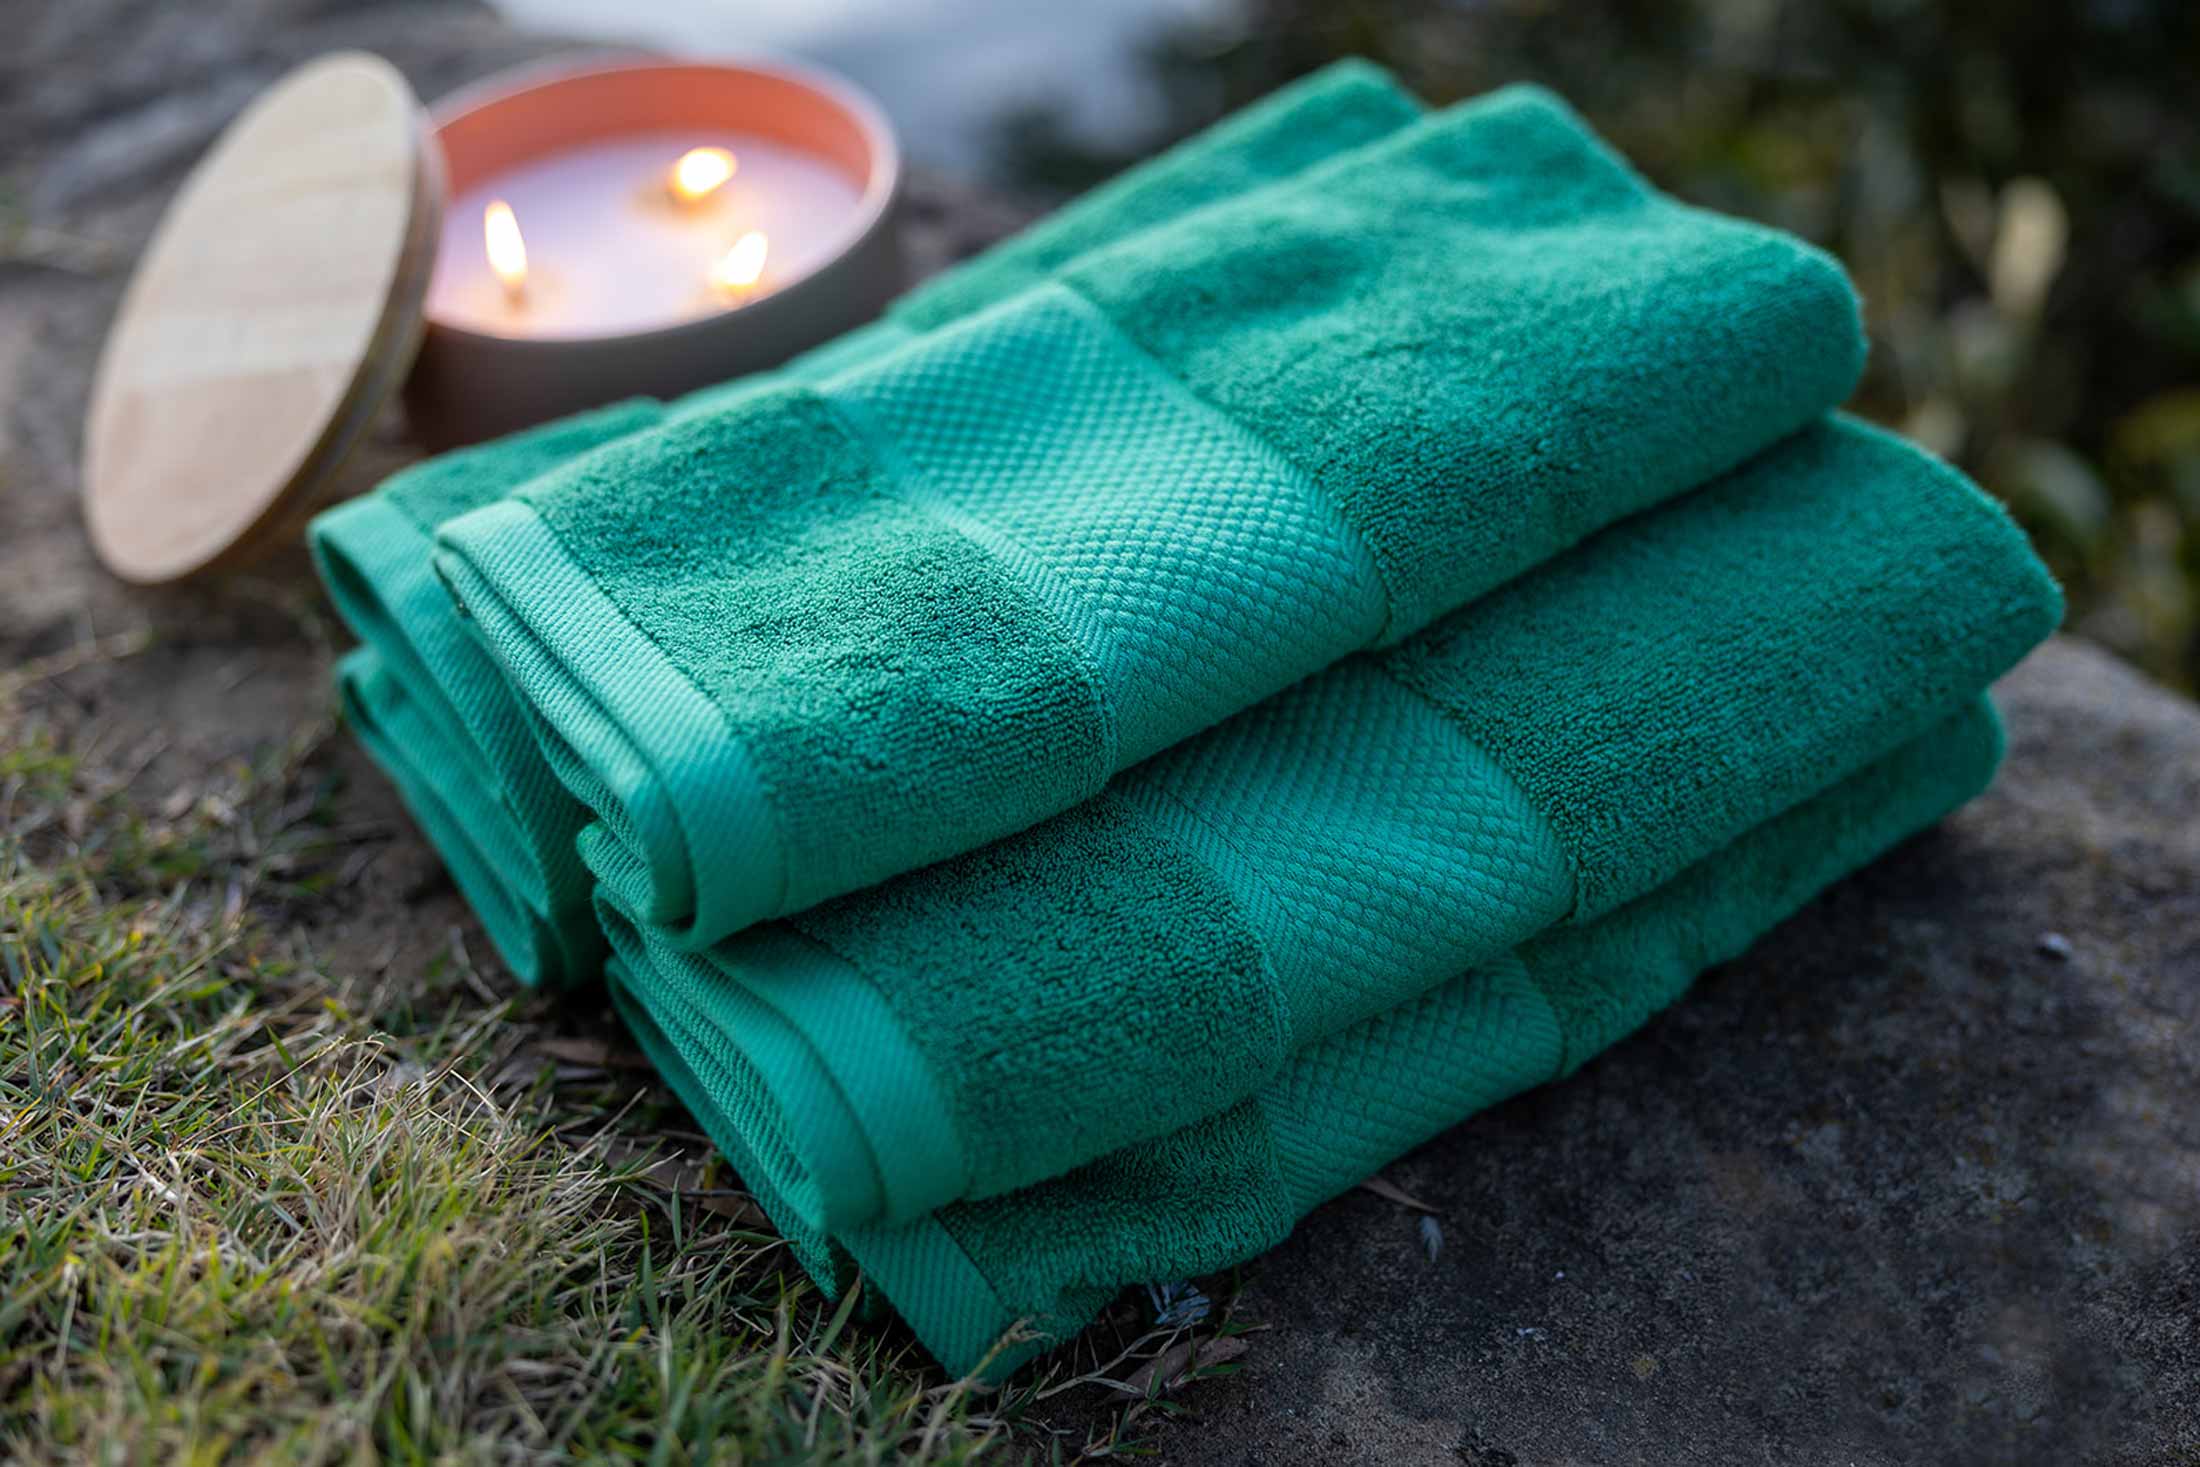 Immerse yourself in spa luxury with Ornamajo's ultra-soft and absorbent hand towels, perfect for a pampering retreat.